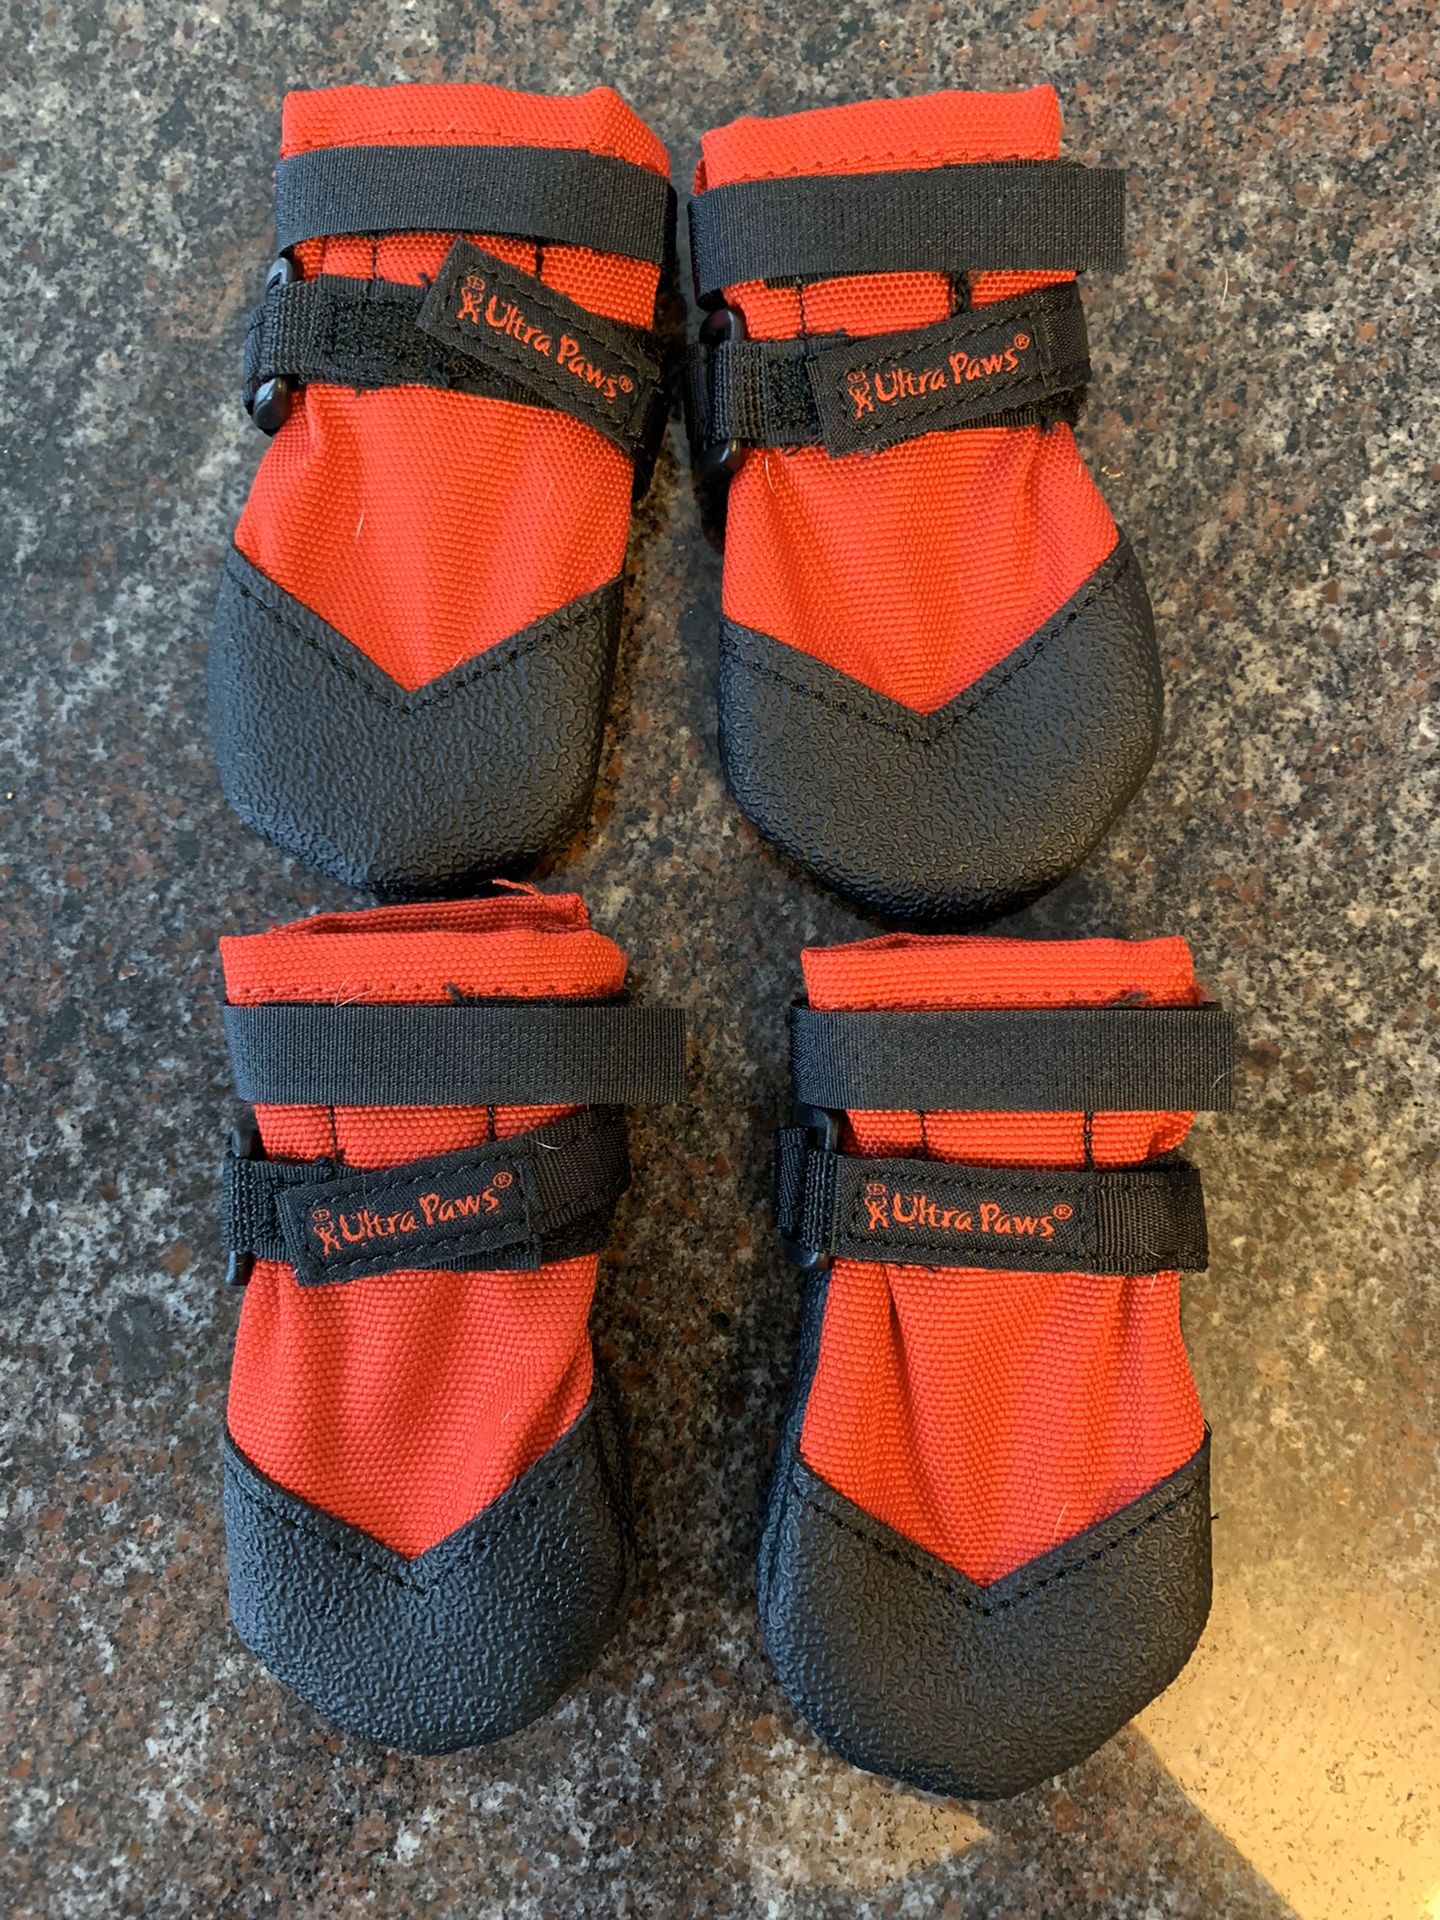 NEW Ultra Paws Dog Boots - Small